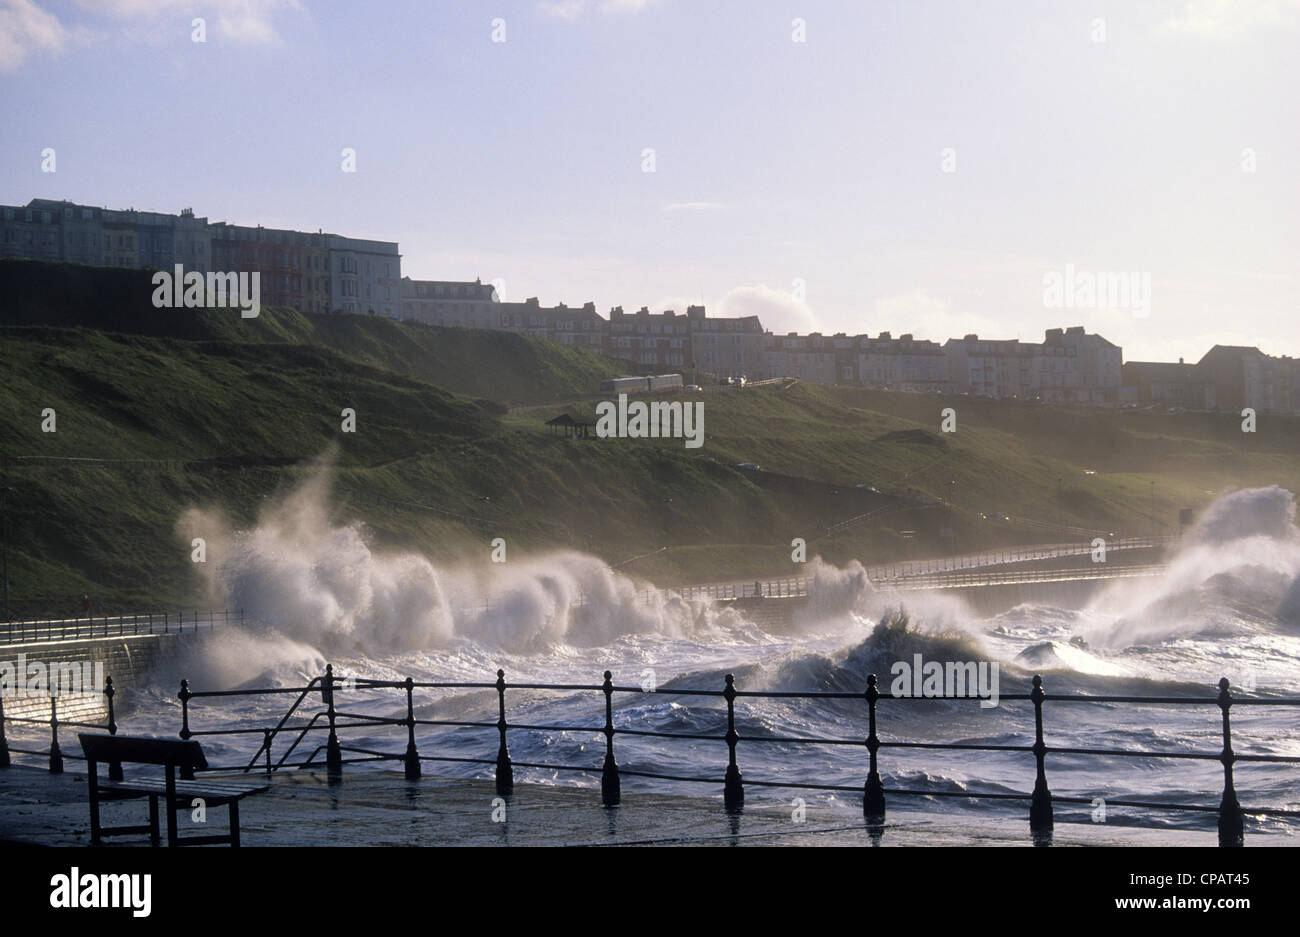 giant waves crashing over sea defences at the north bay scarborough during storm yorkshire uk Stock Photo